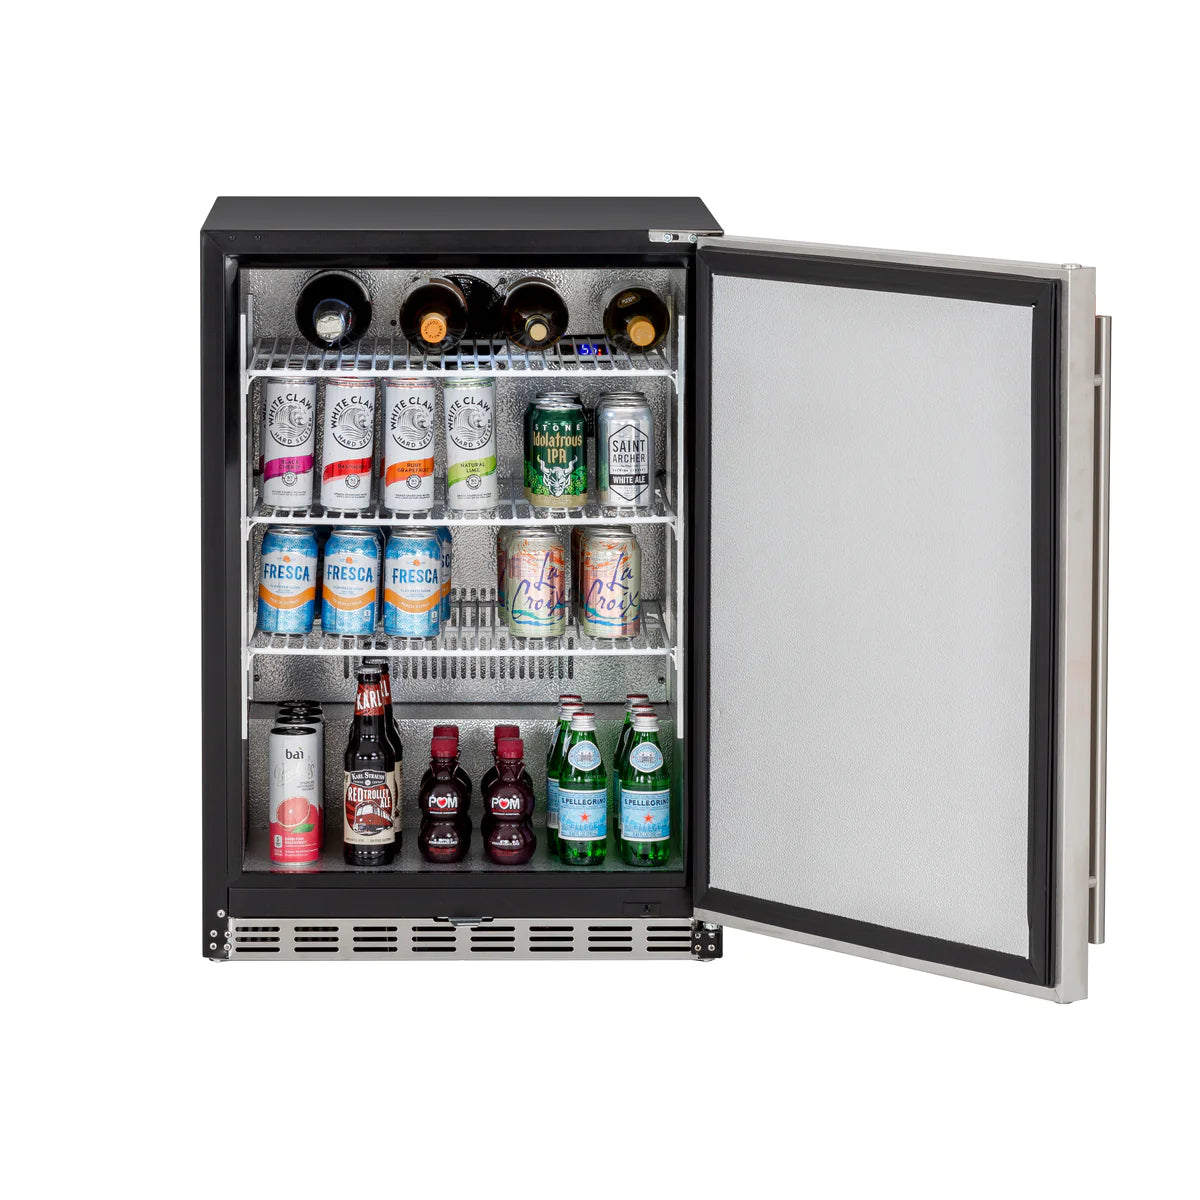 24" 5.3c Outdoor Rated Refrigerator